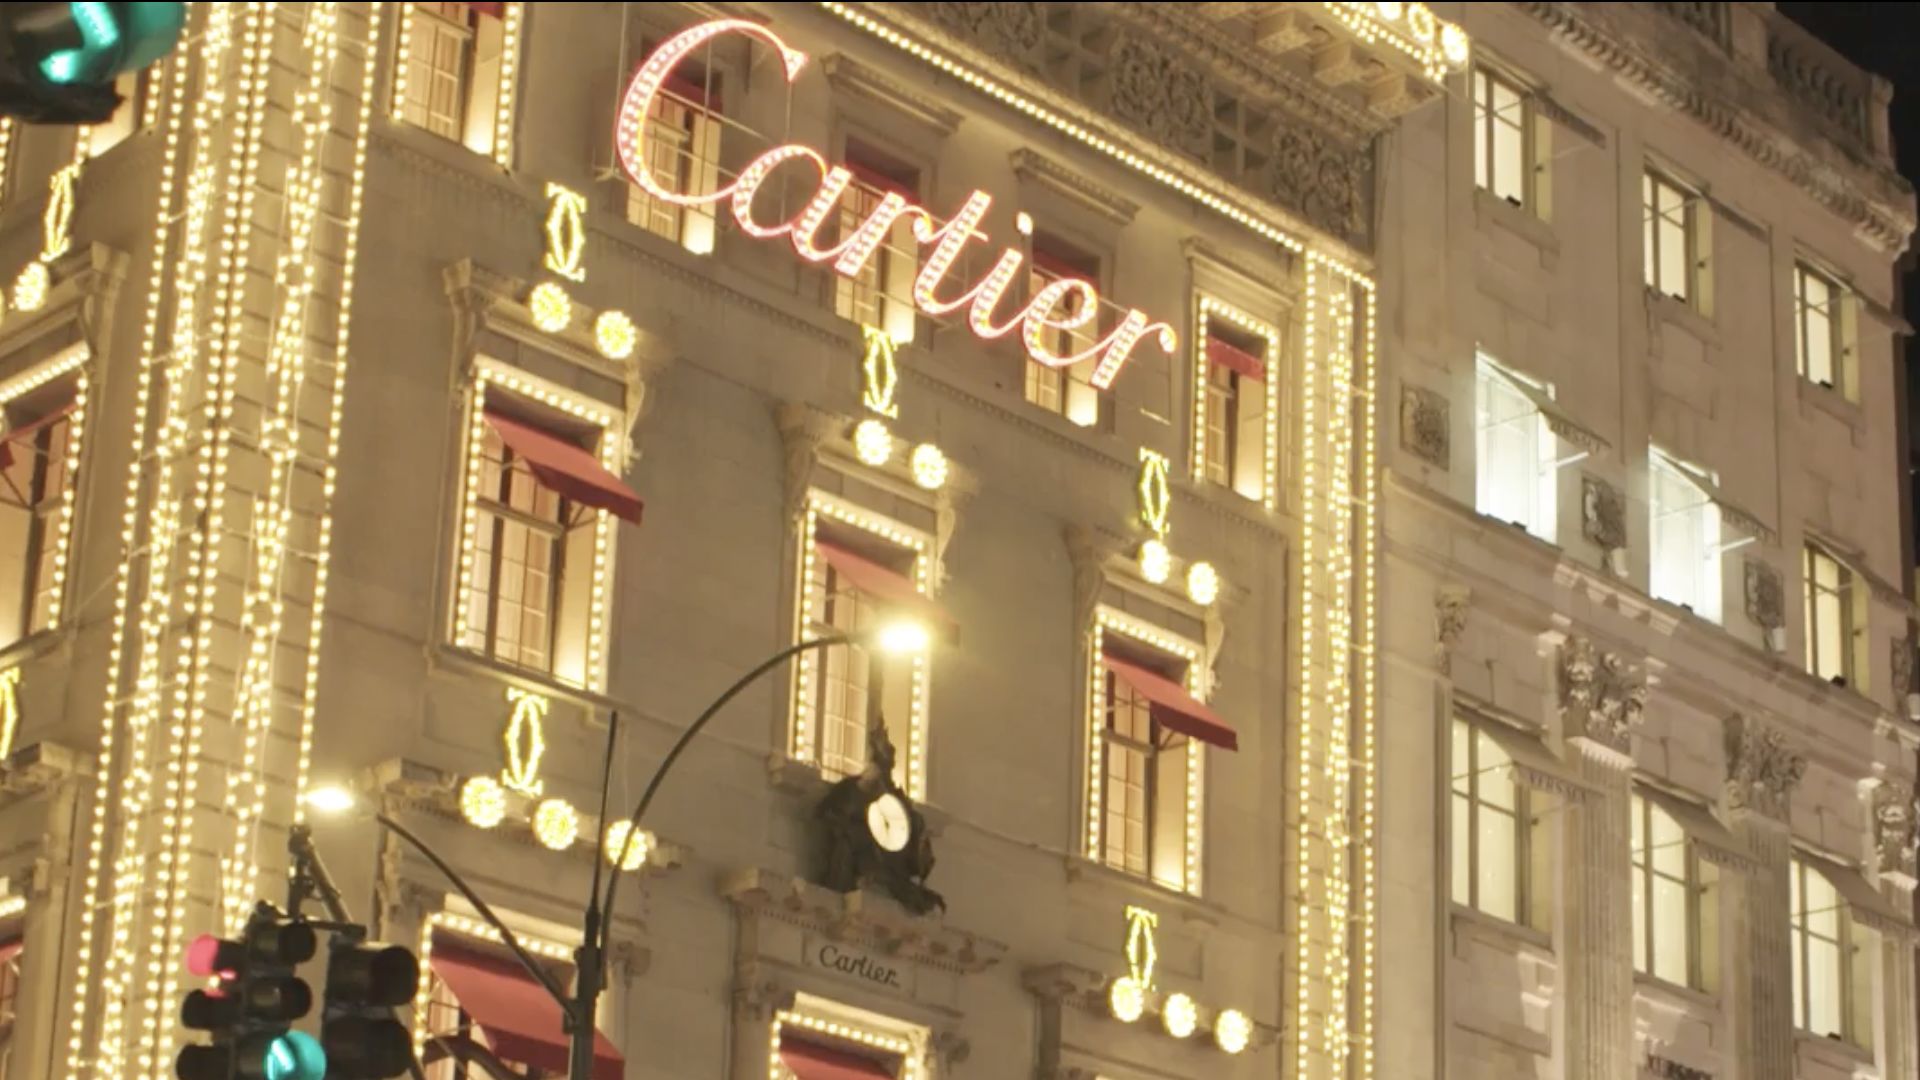 Cartier's New York City Mansion Undergoes a Dazzling Transformation